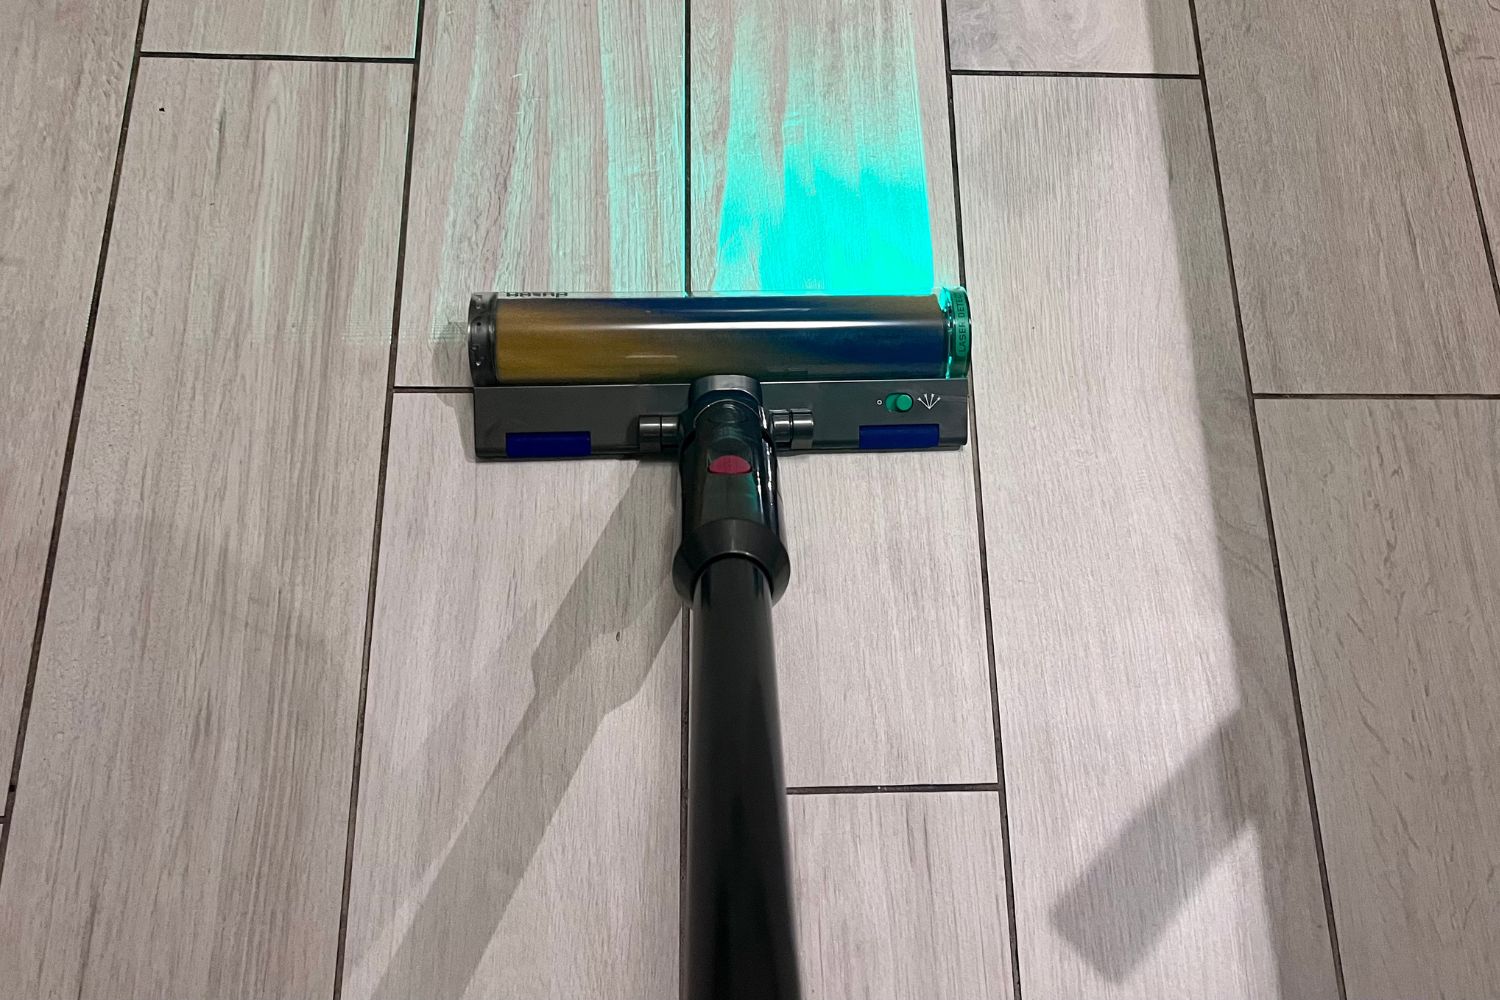 The best vacuum for tile floors in use cleaning a tile floor with its LED light shining on debris.